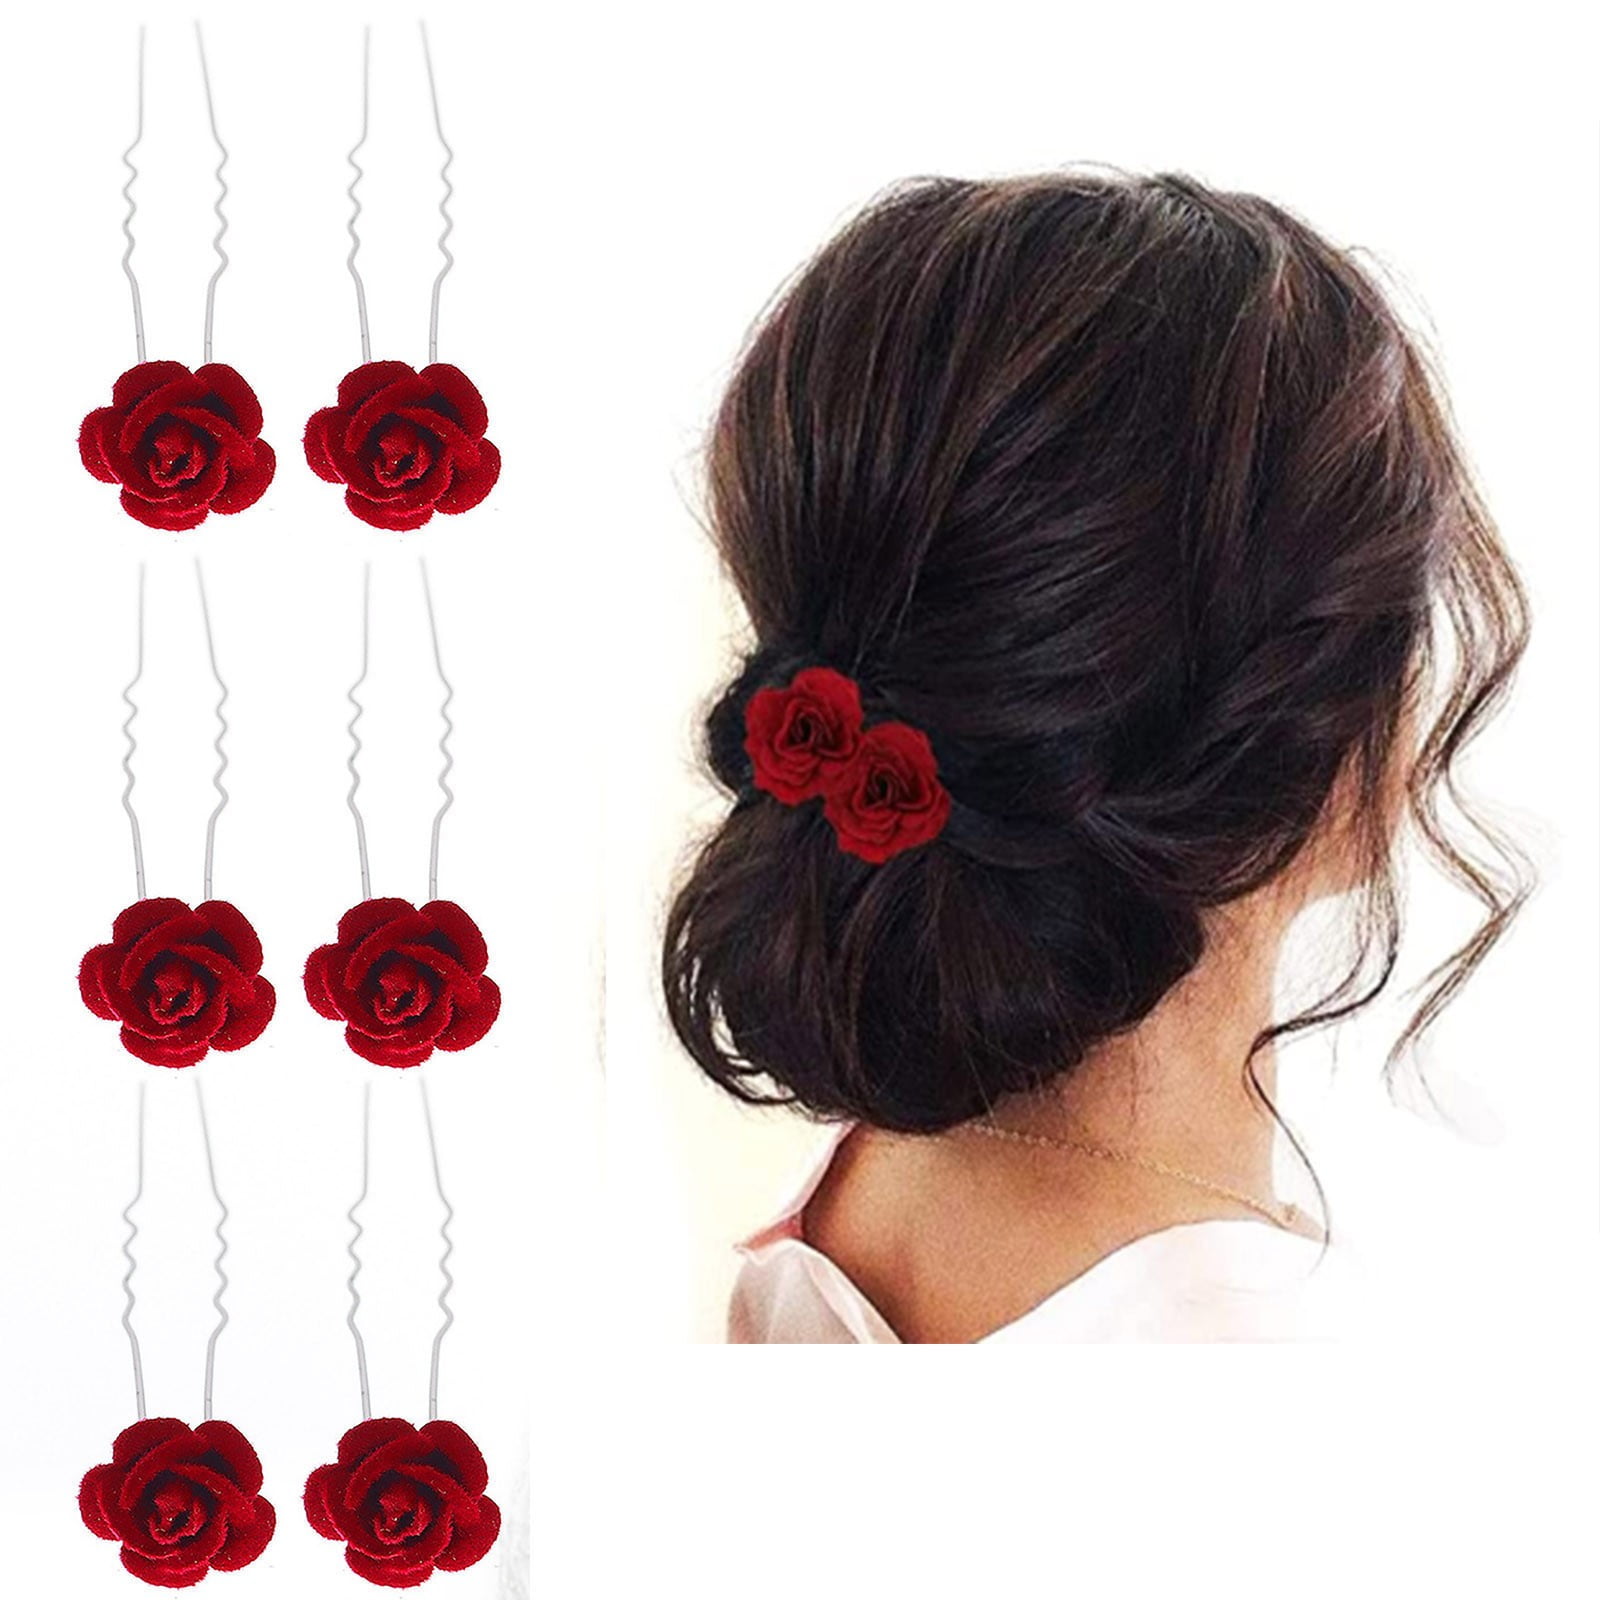 Buy Red Flower Hair Clip, Red Rose Hair Piece, Spanish Rose for Hair, Red  Satin Hair Flower Clip, Burgundy Fabric Rose Brooch, Red Flower Brooch  Online in India - Etsy